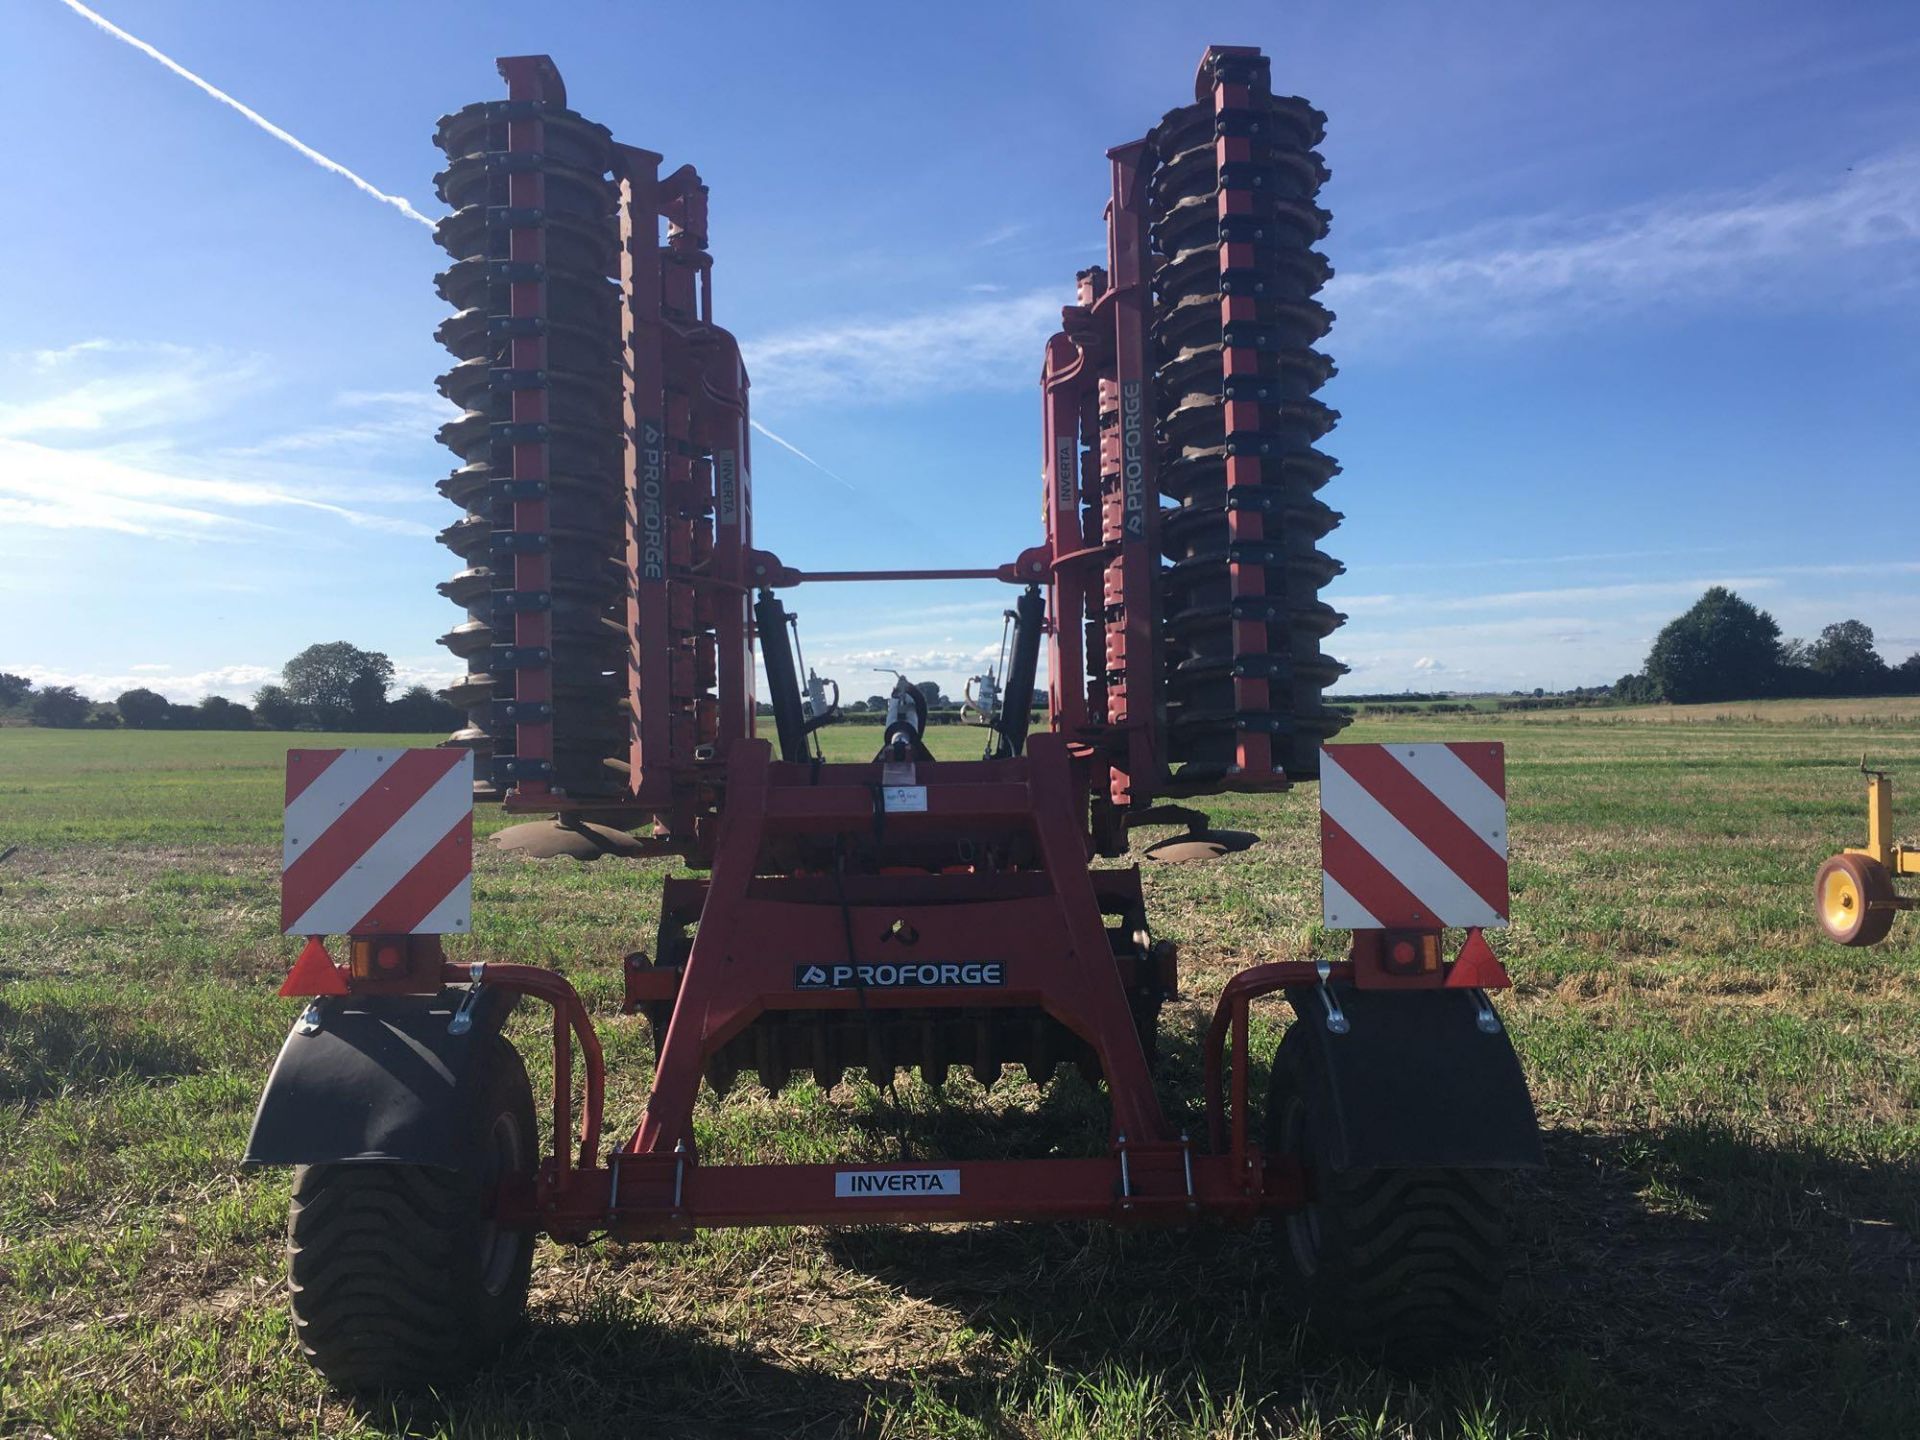 2018 Proforge Inverta 6m hydraulic folding cultivator with discs and rear packer roller. - Image 4 of 12